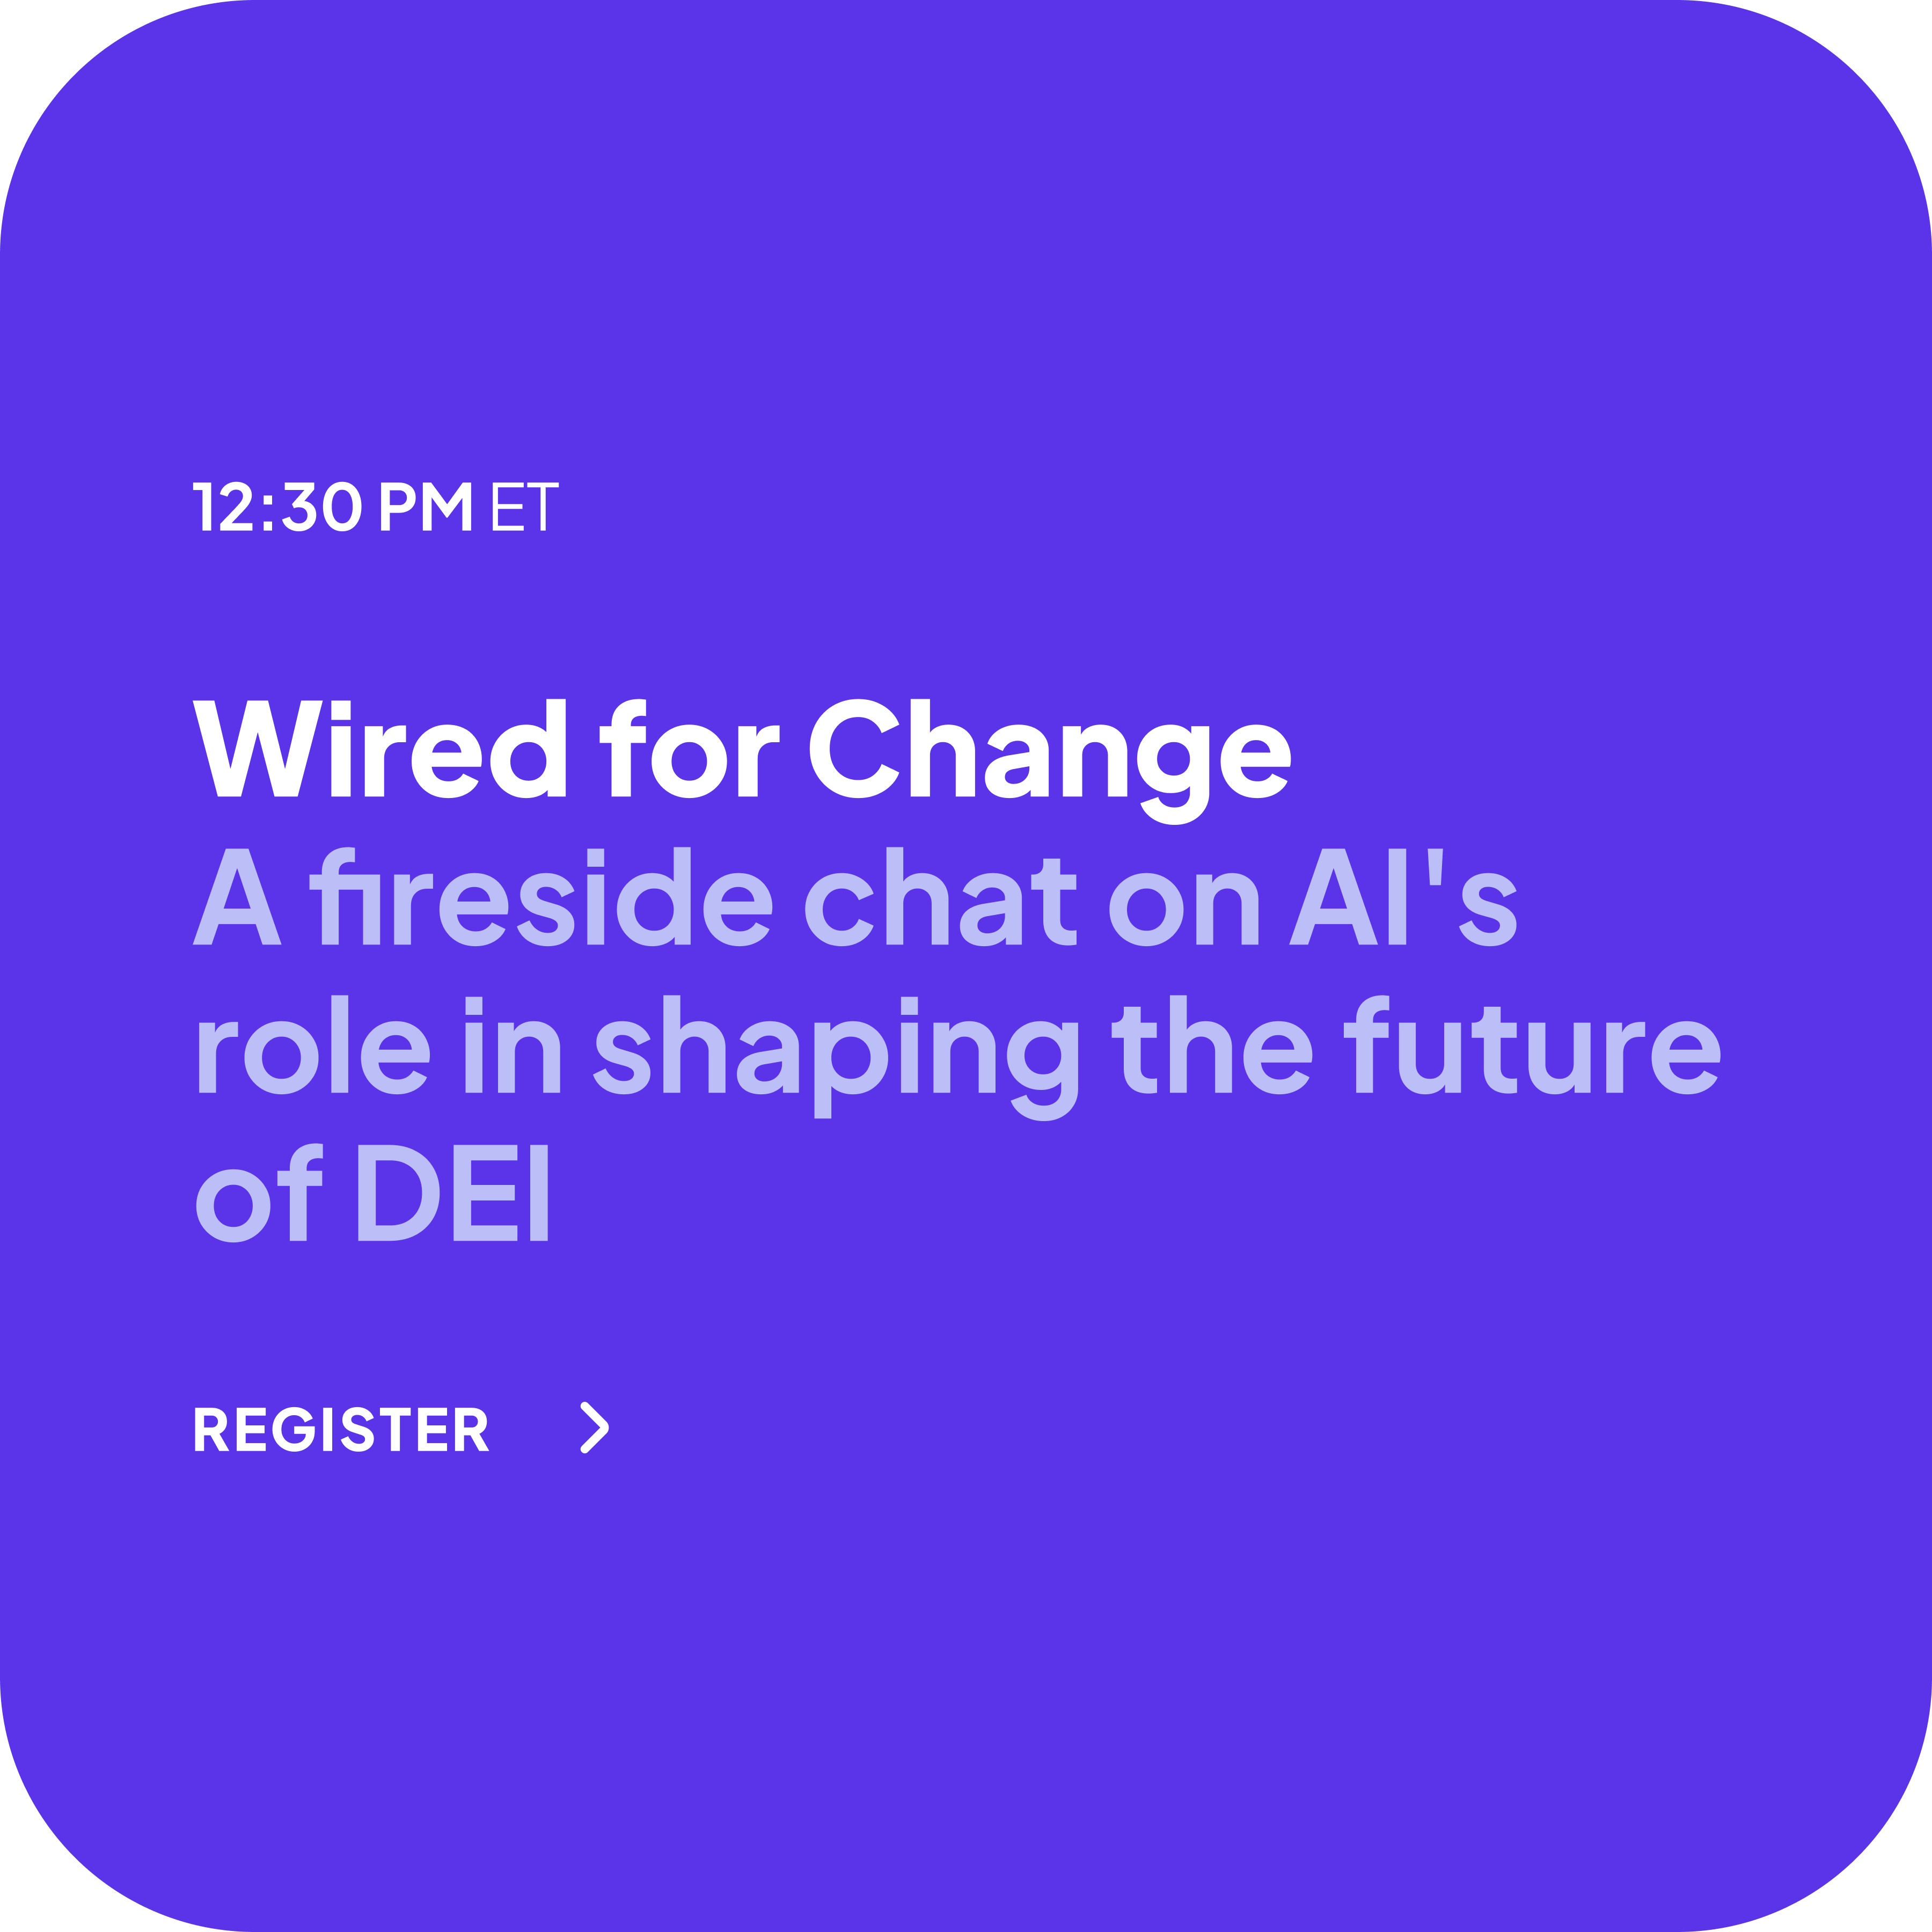 Wired for change